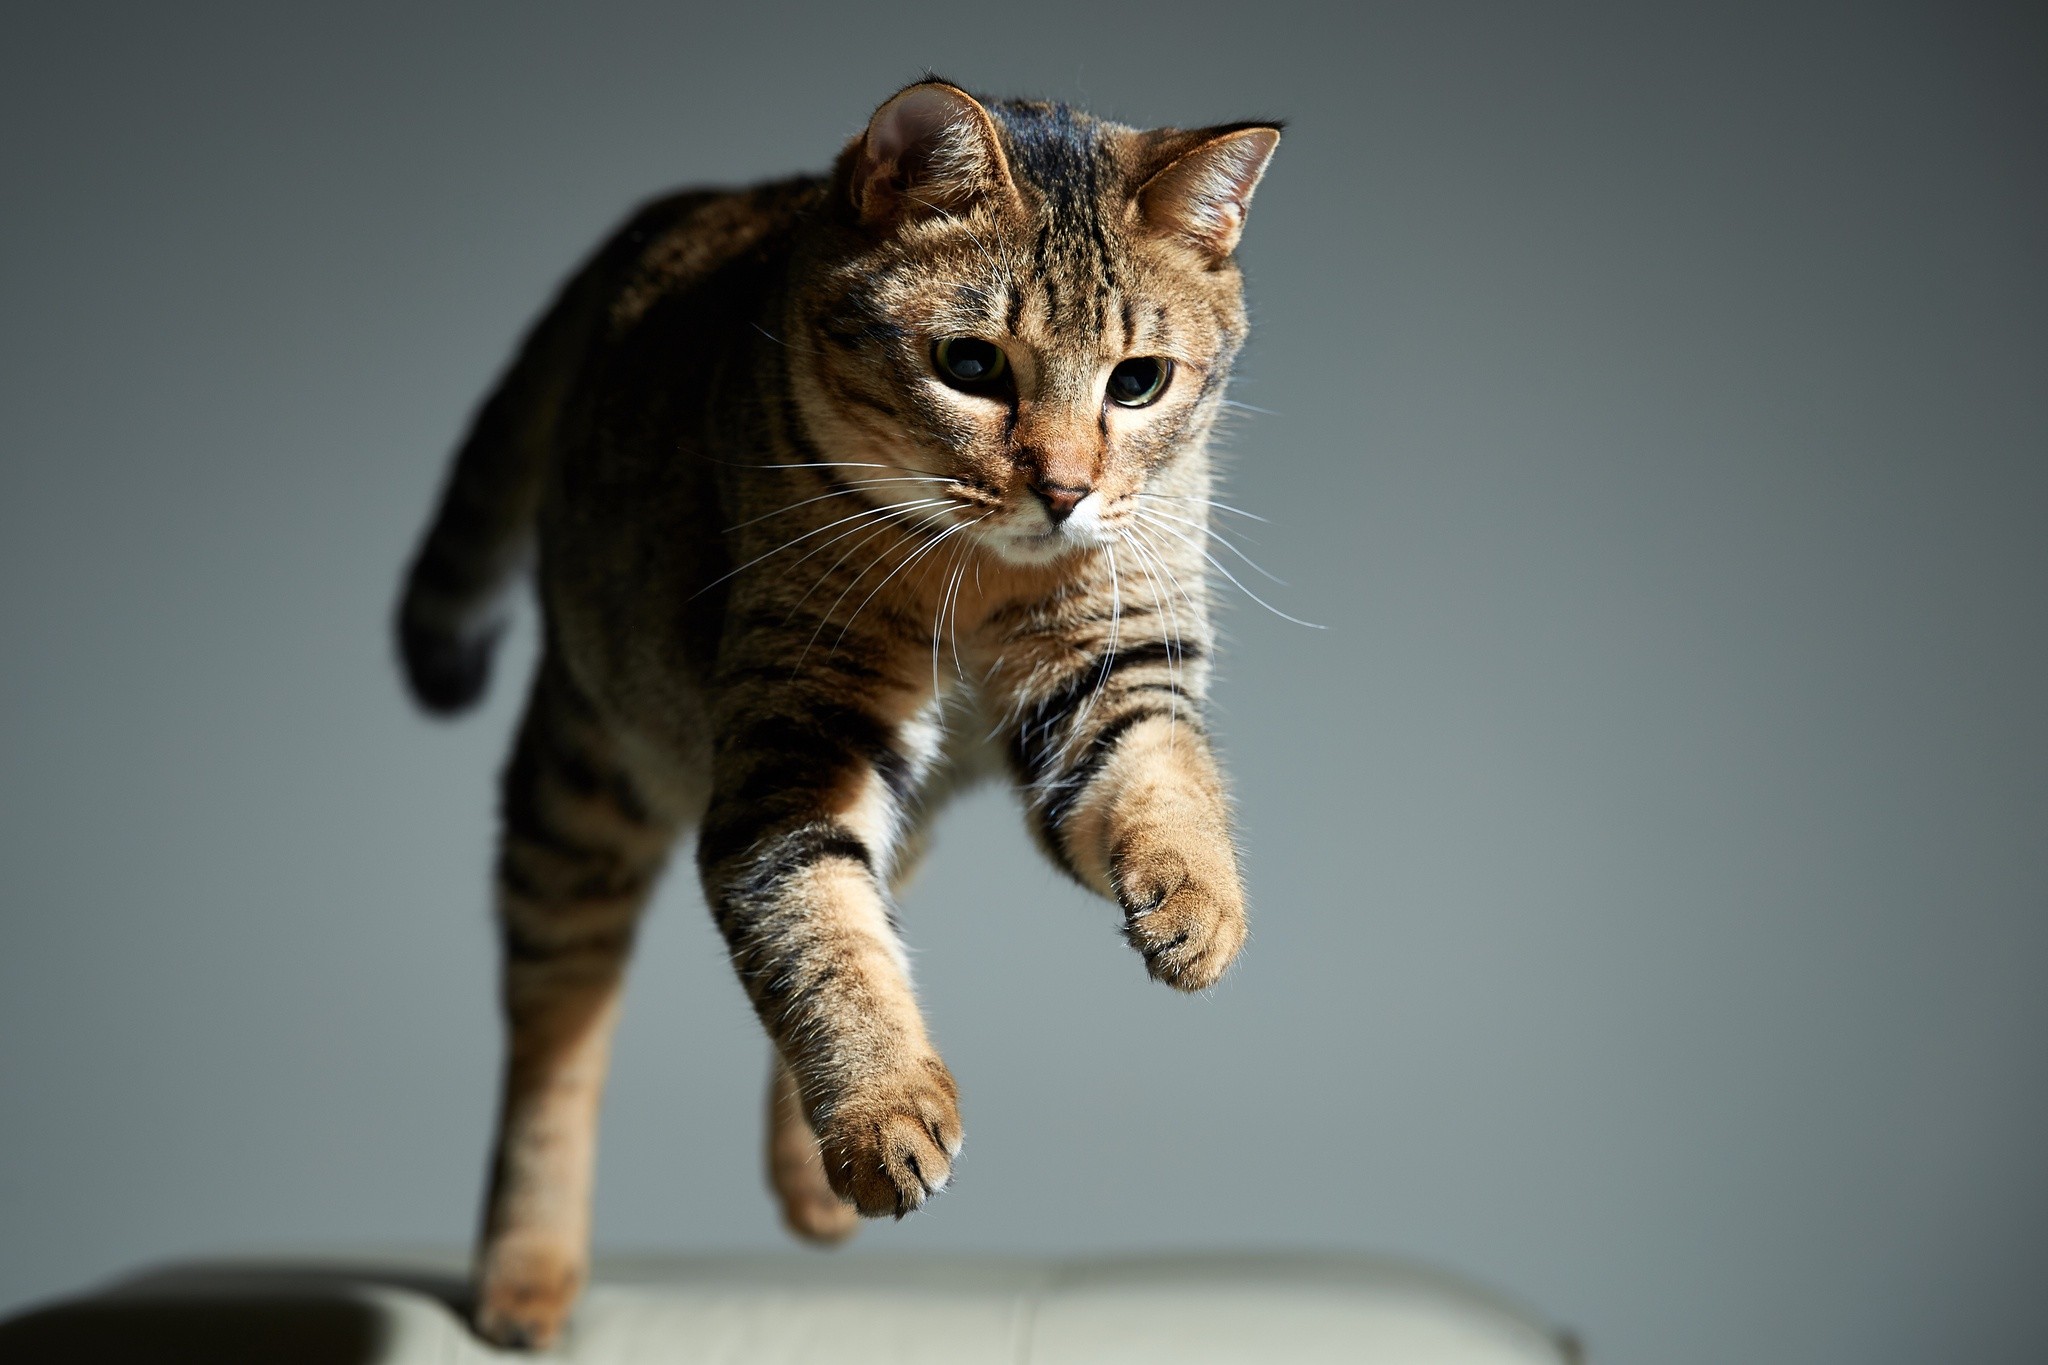 General 2048x1365 cats animals jumping closeup simple background